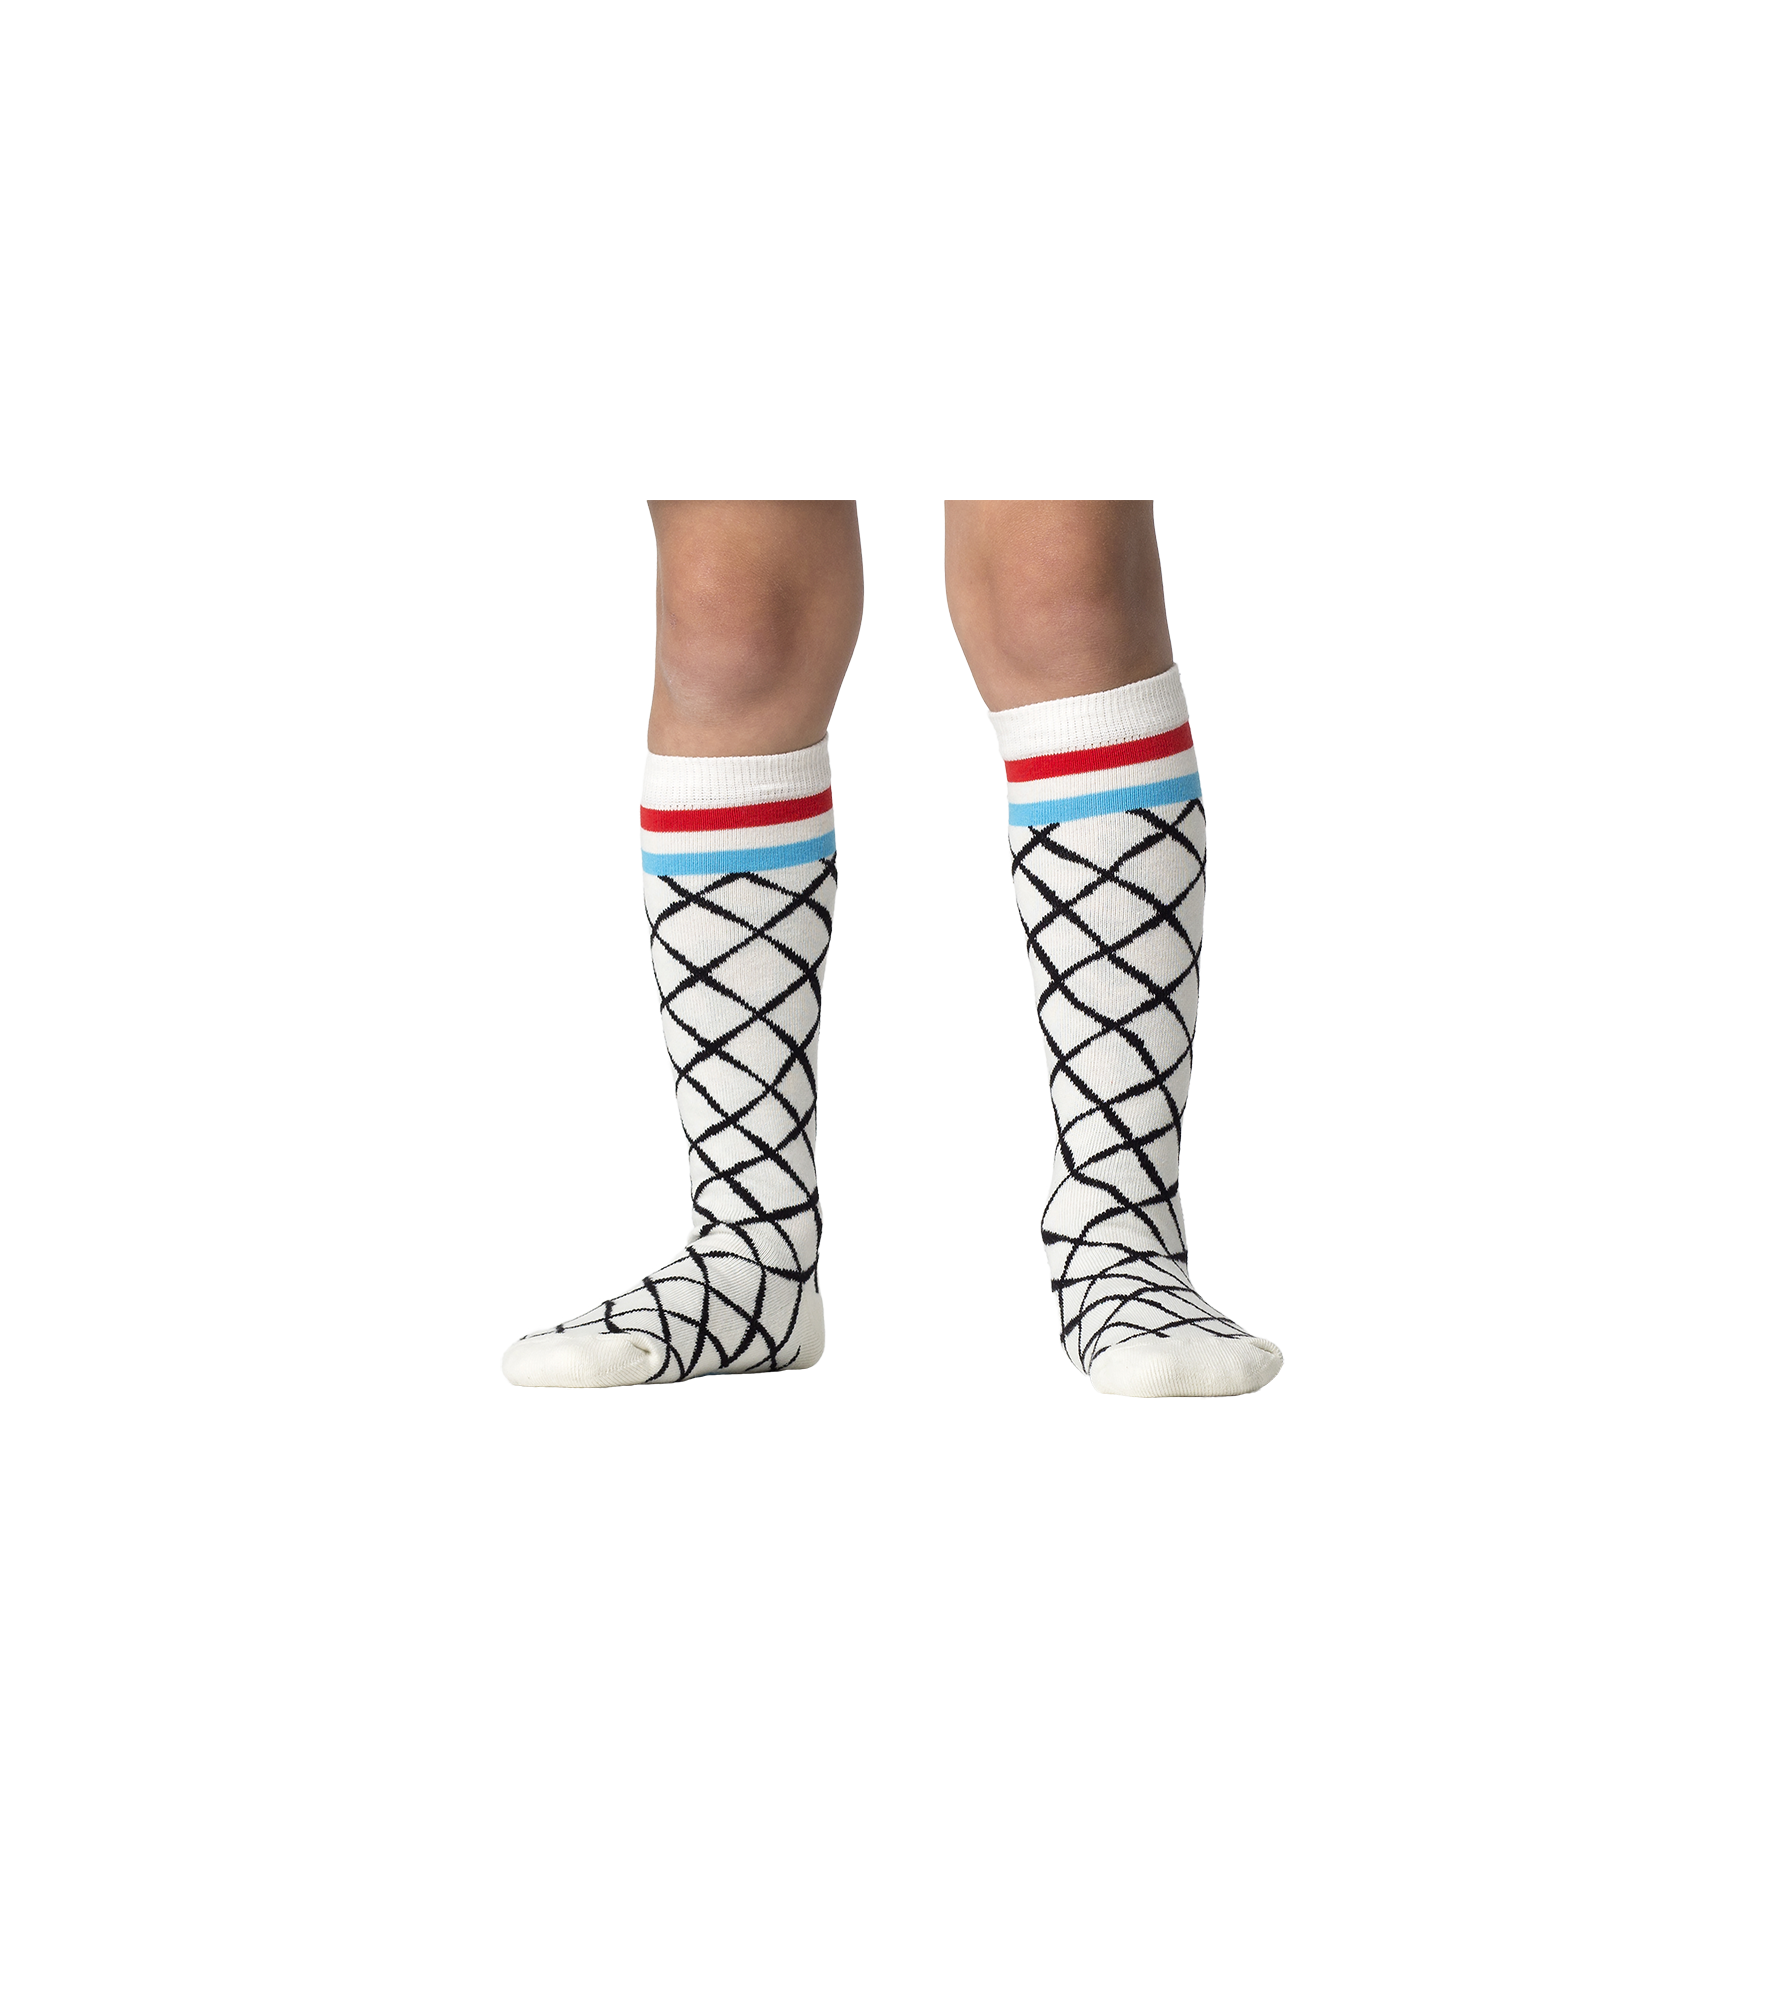 CUTOUT_Catch-of-the-day Socks.png